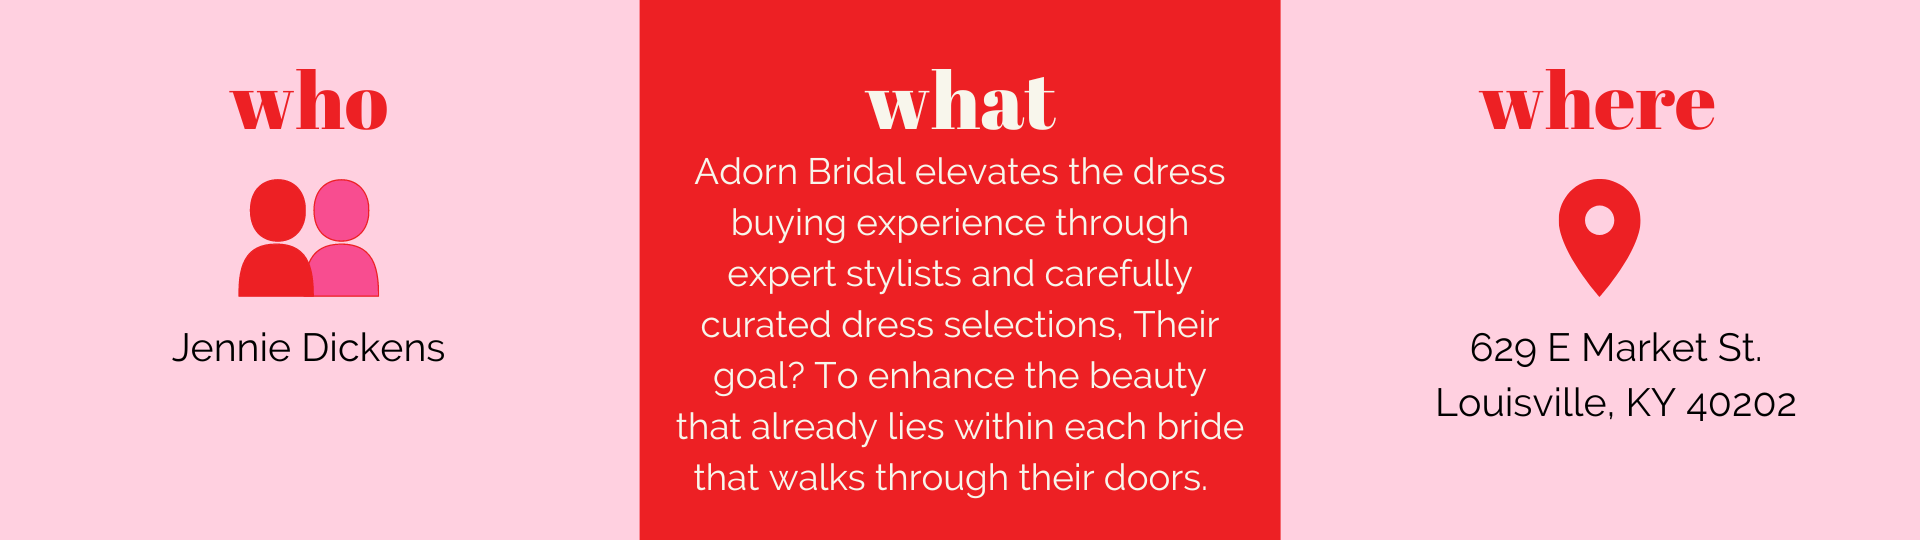 Text graphic that showcases info about Adorn Bridal Studio, including the owner's name: Jennie Dickens, a short bio of the shop, and the address/location in Nulu.